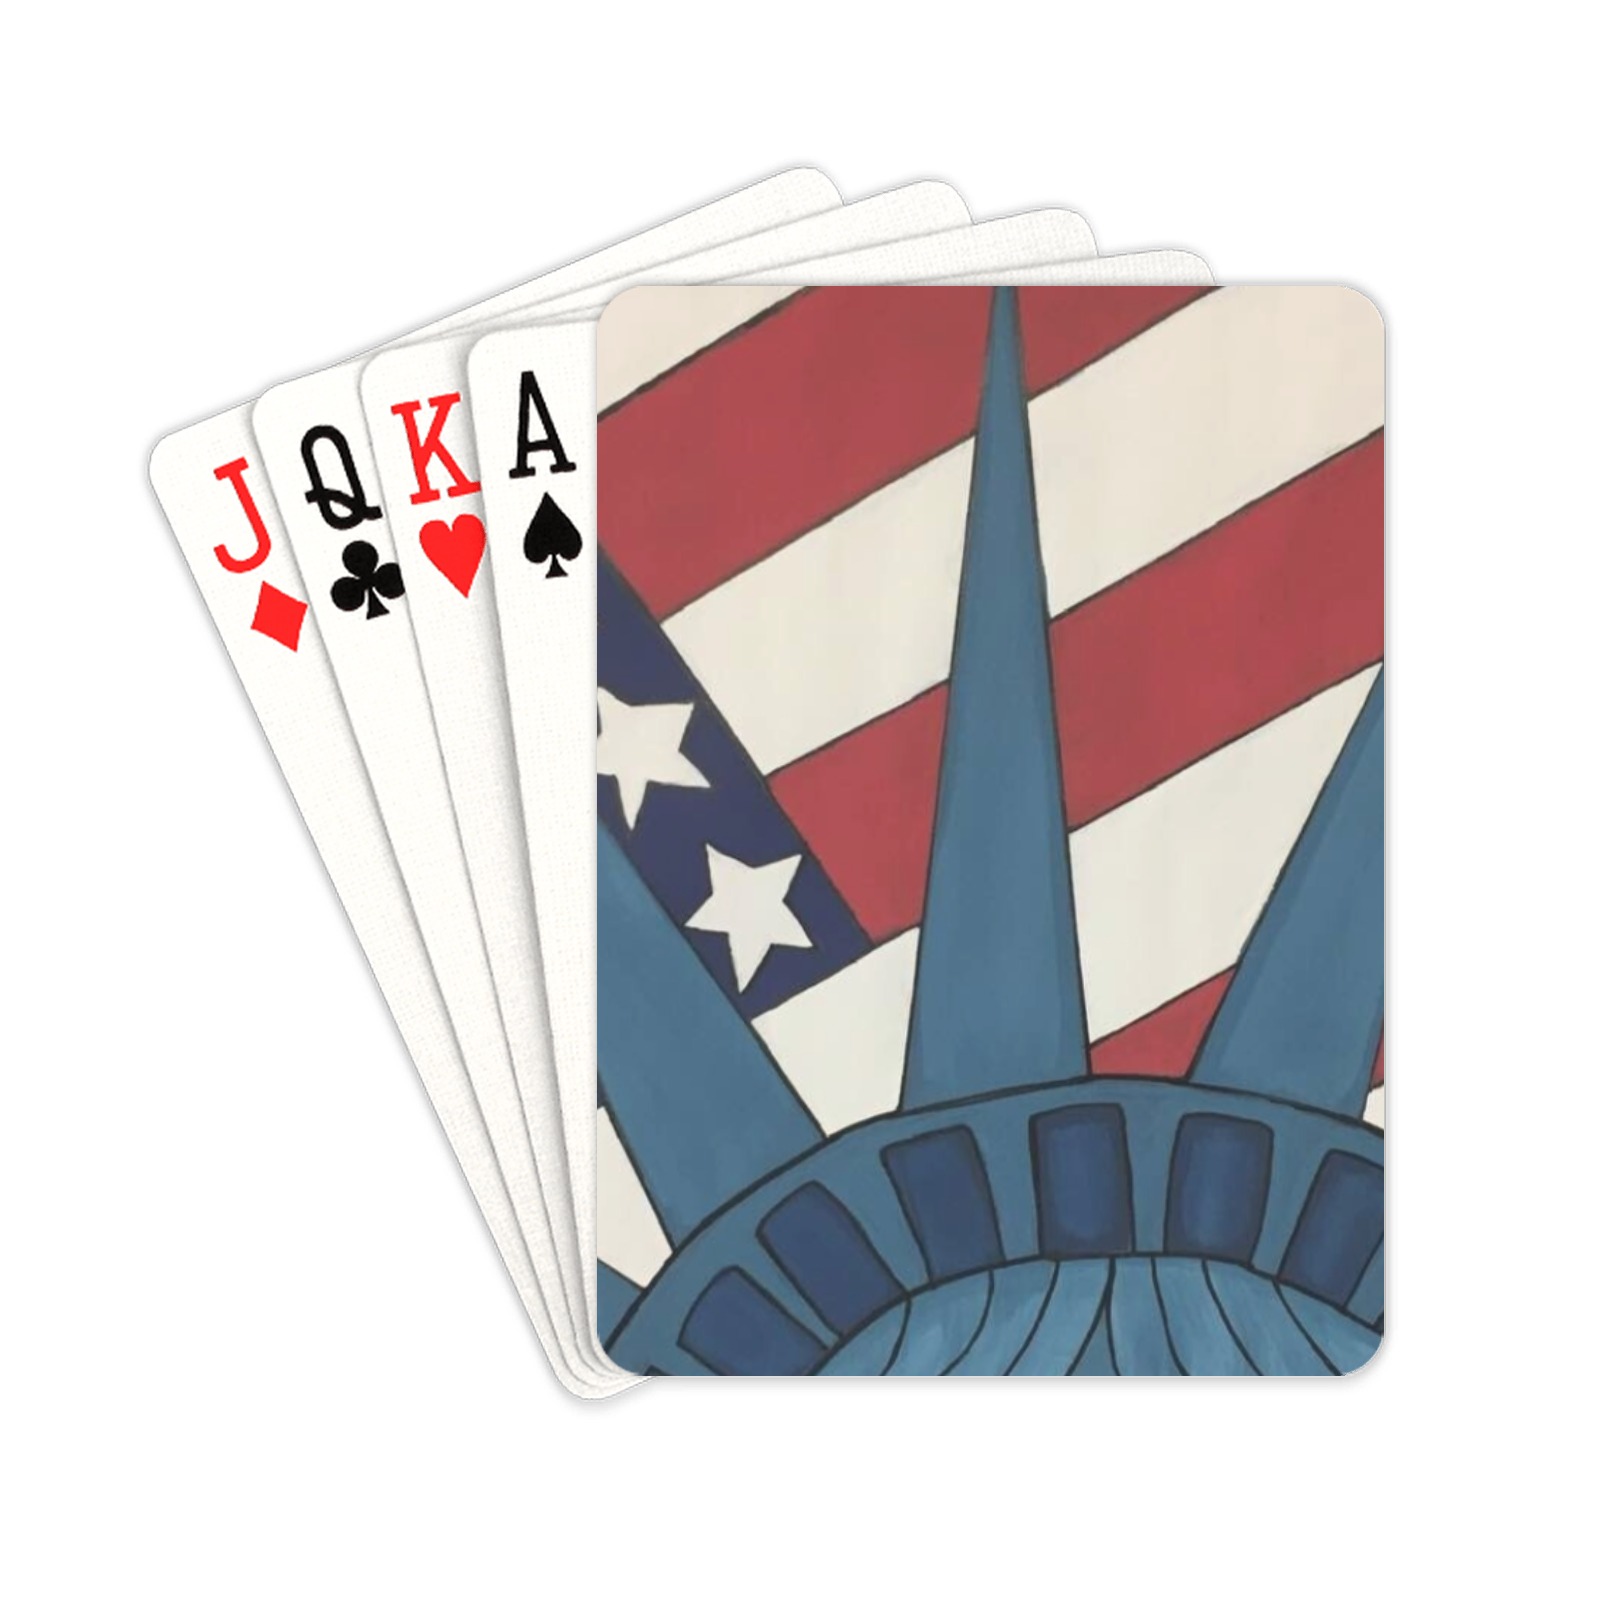 Liberty 2021 Playing Cards 2.5"x3.5"